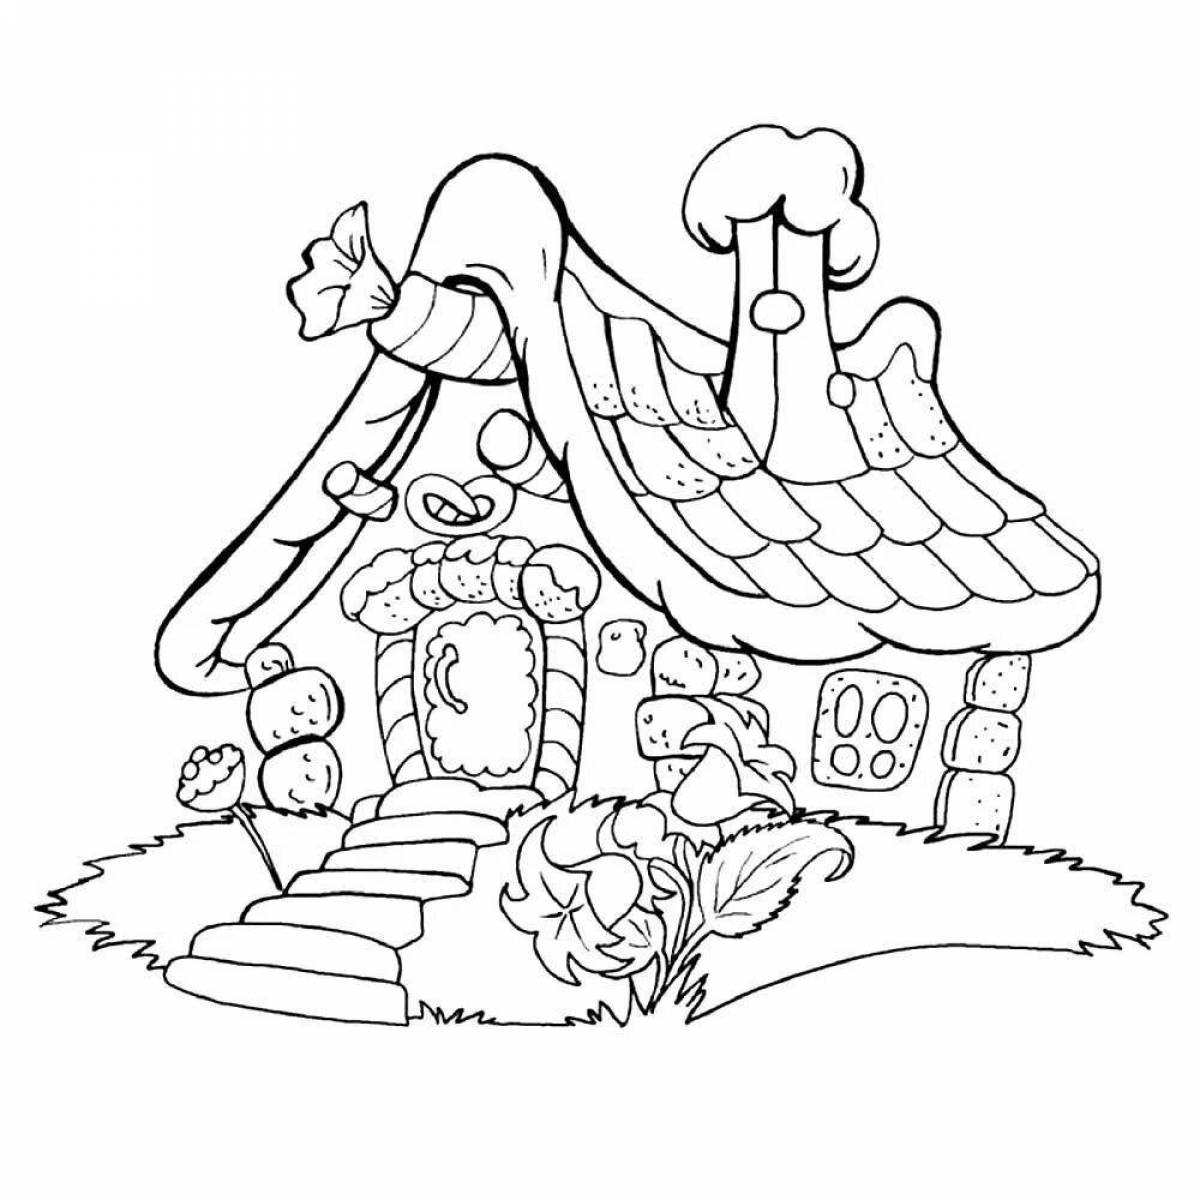 Cute hut coloring for kids